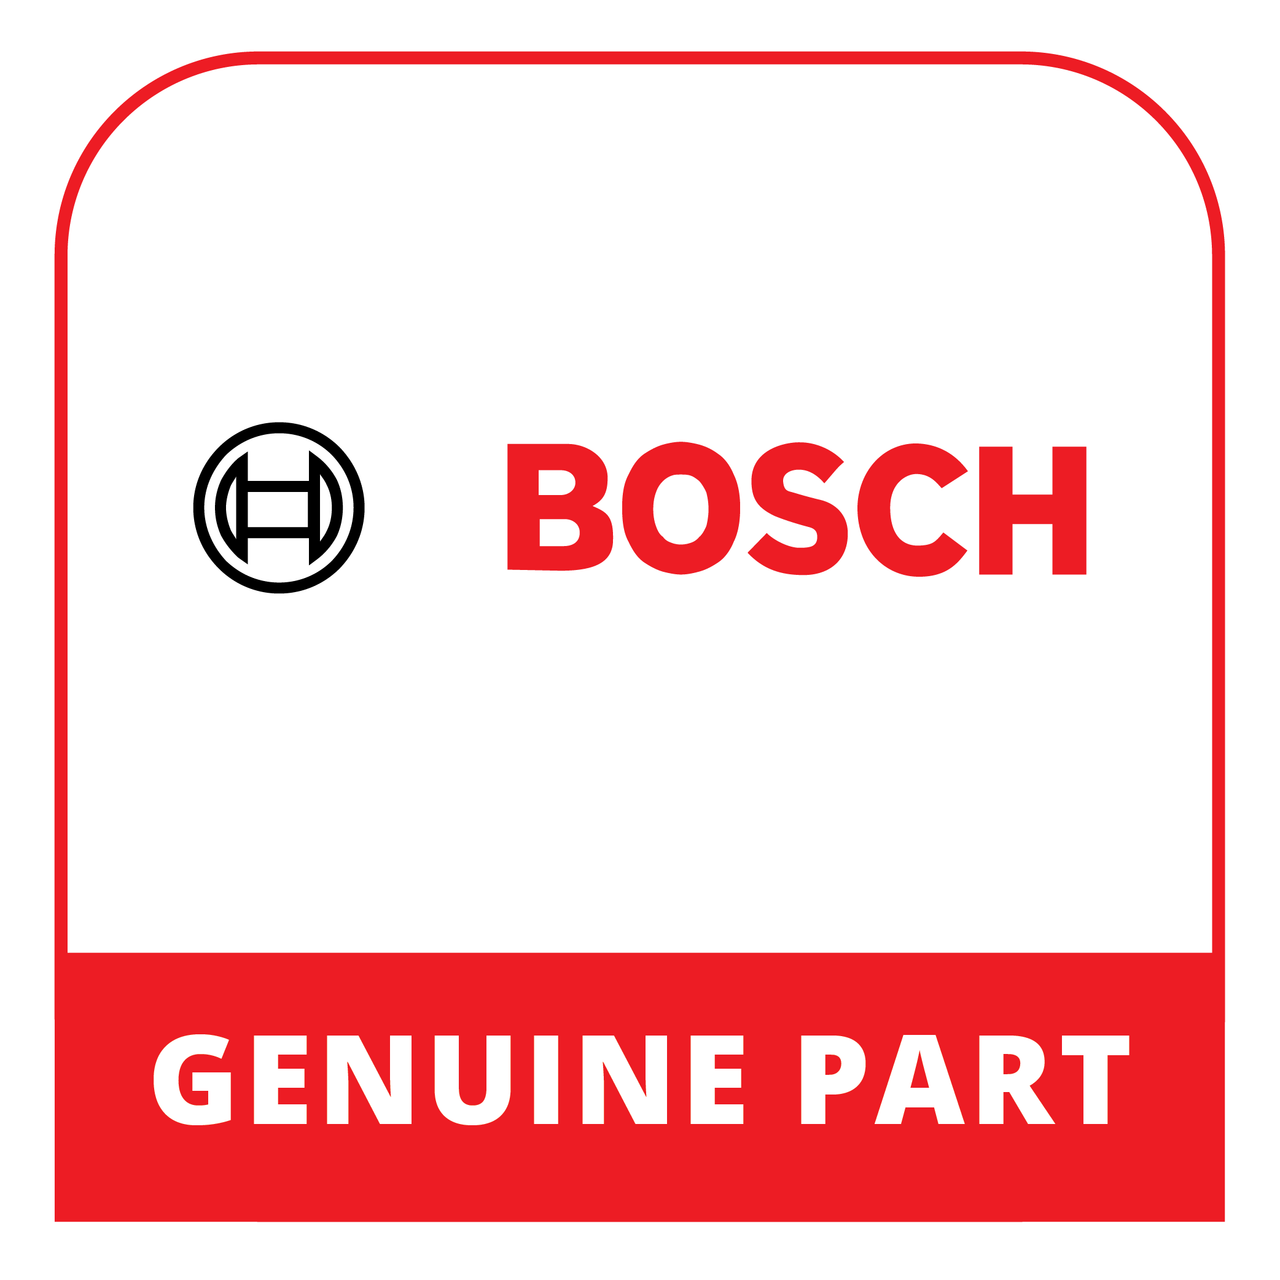 Bosch (Thermador) 00778653 - Panel - Genuine Bosch (Thermador) Part